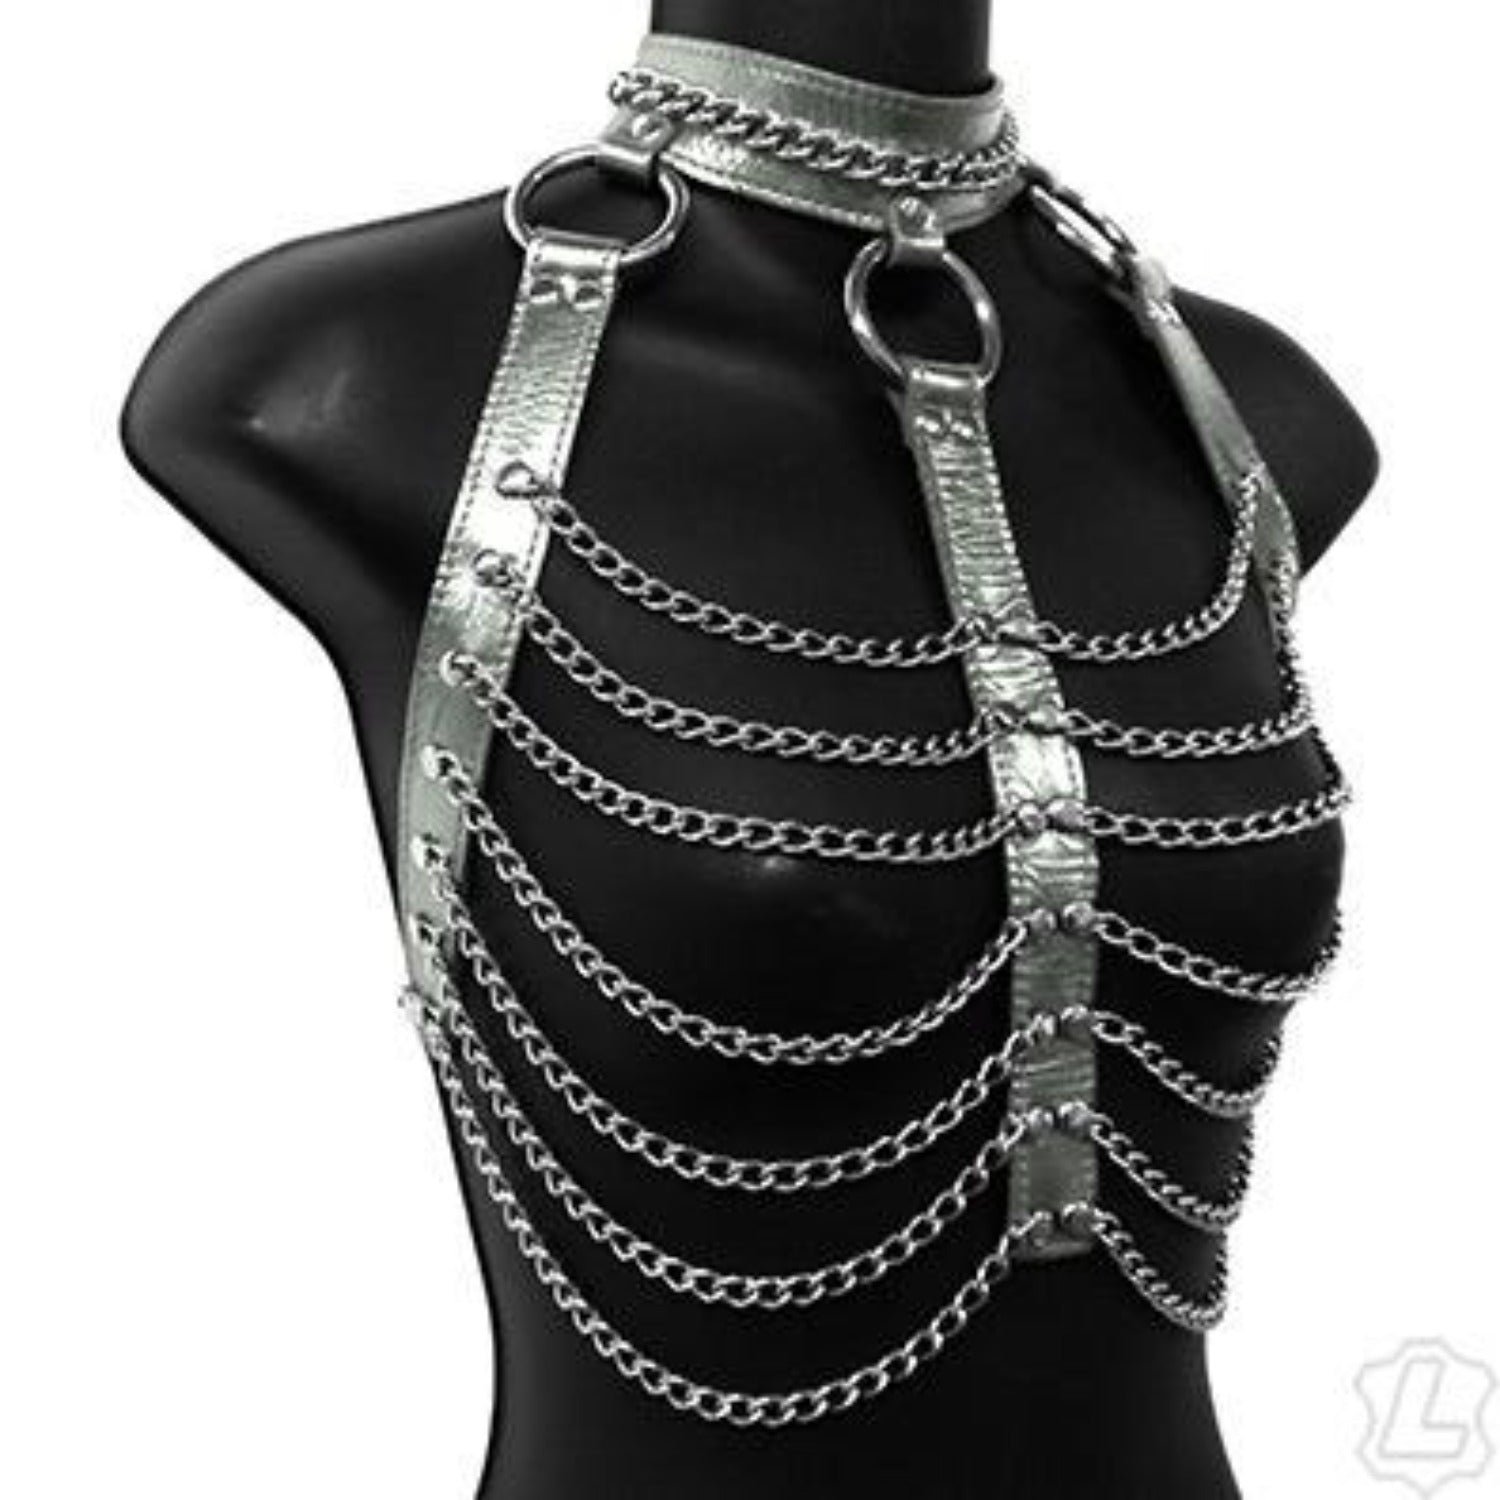 The silver metallic leather and chain three column halter harness on a mannequin.